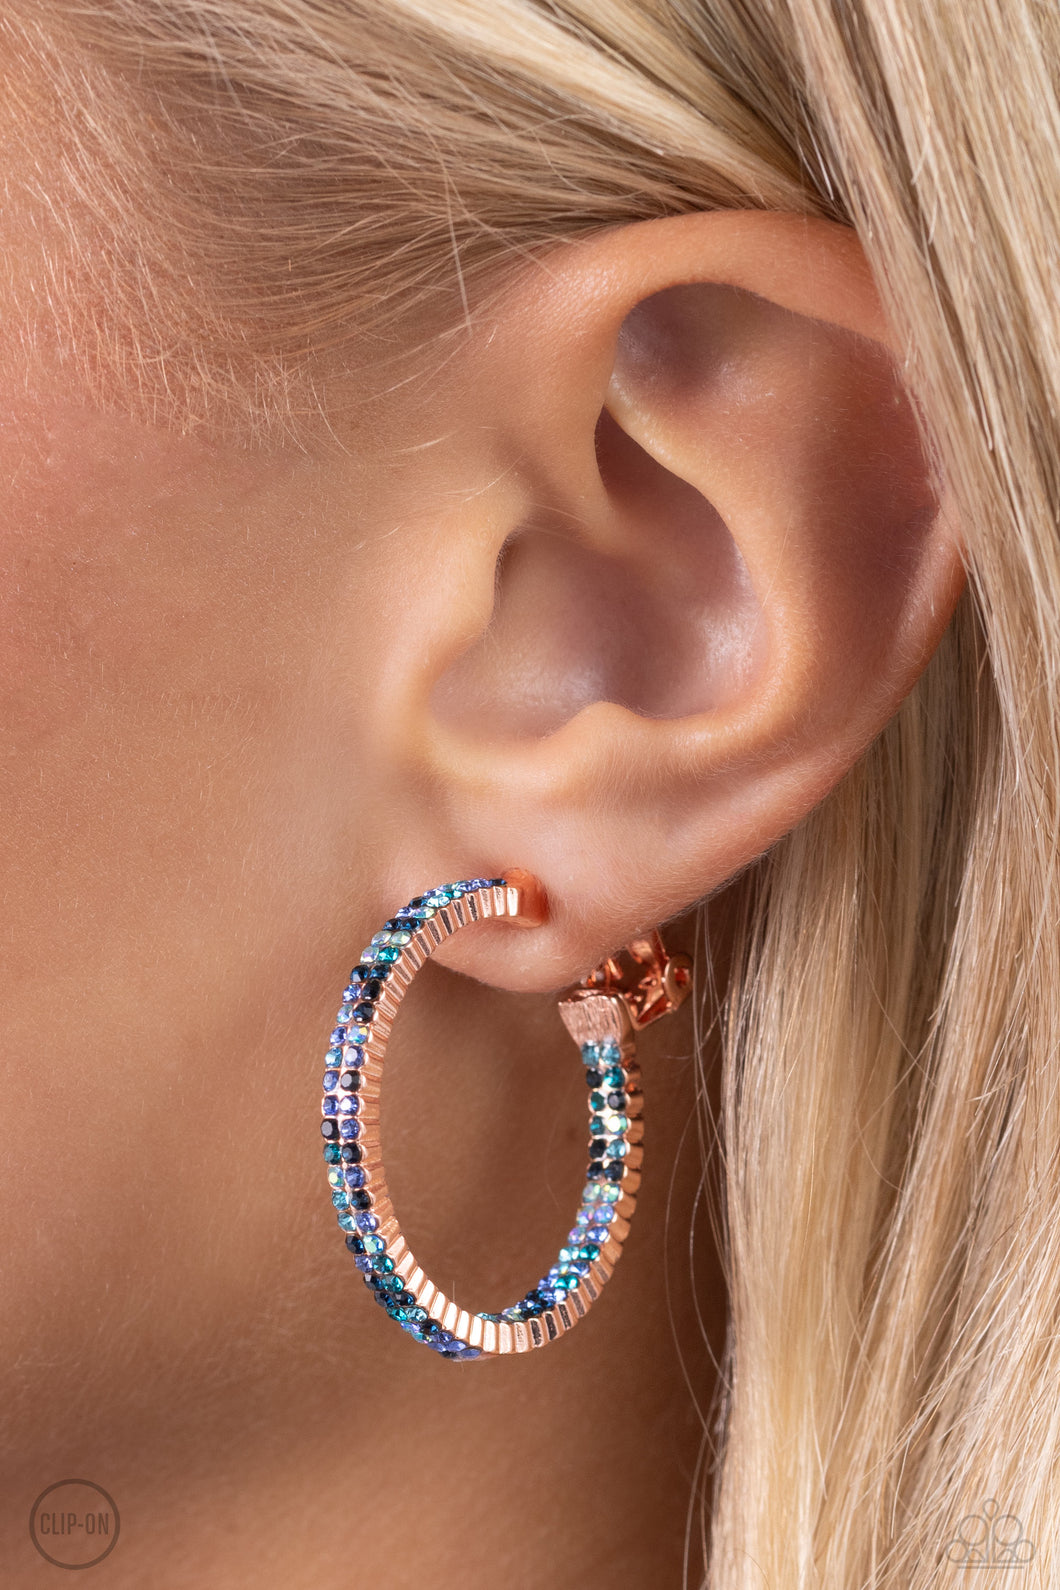 The front half and lower inner curve of a textured shiny copper hoop are encrusted in dazzling ombré shades of blue for a flawless look. Earring attaches to a standard clip-on fitting. Hoop measures approximately 1